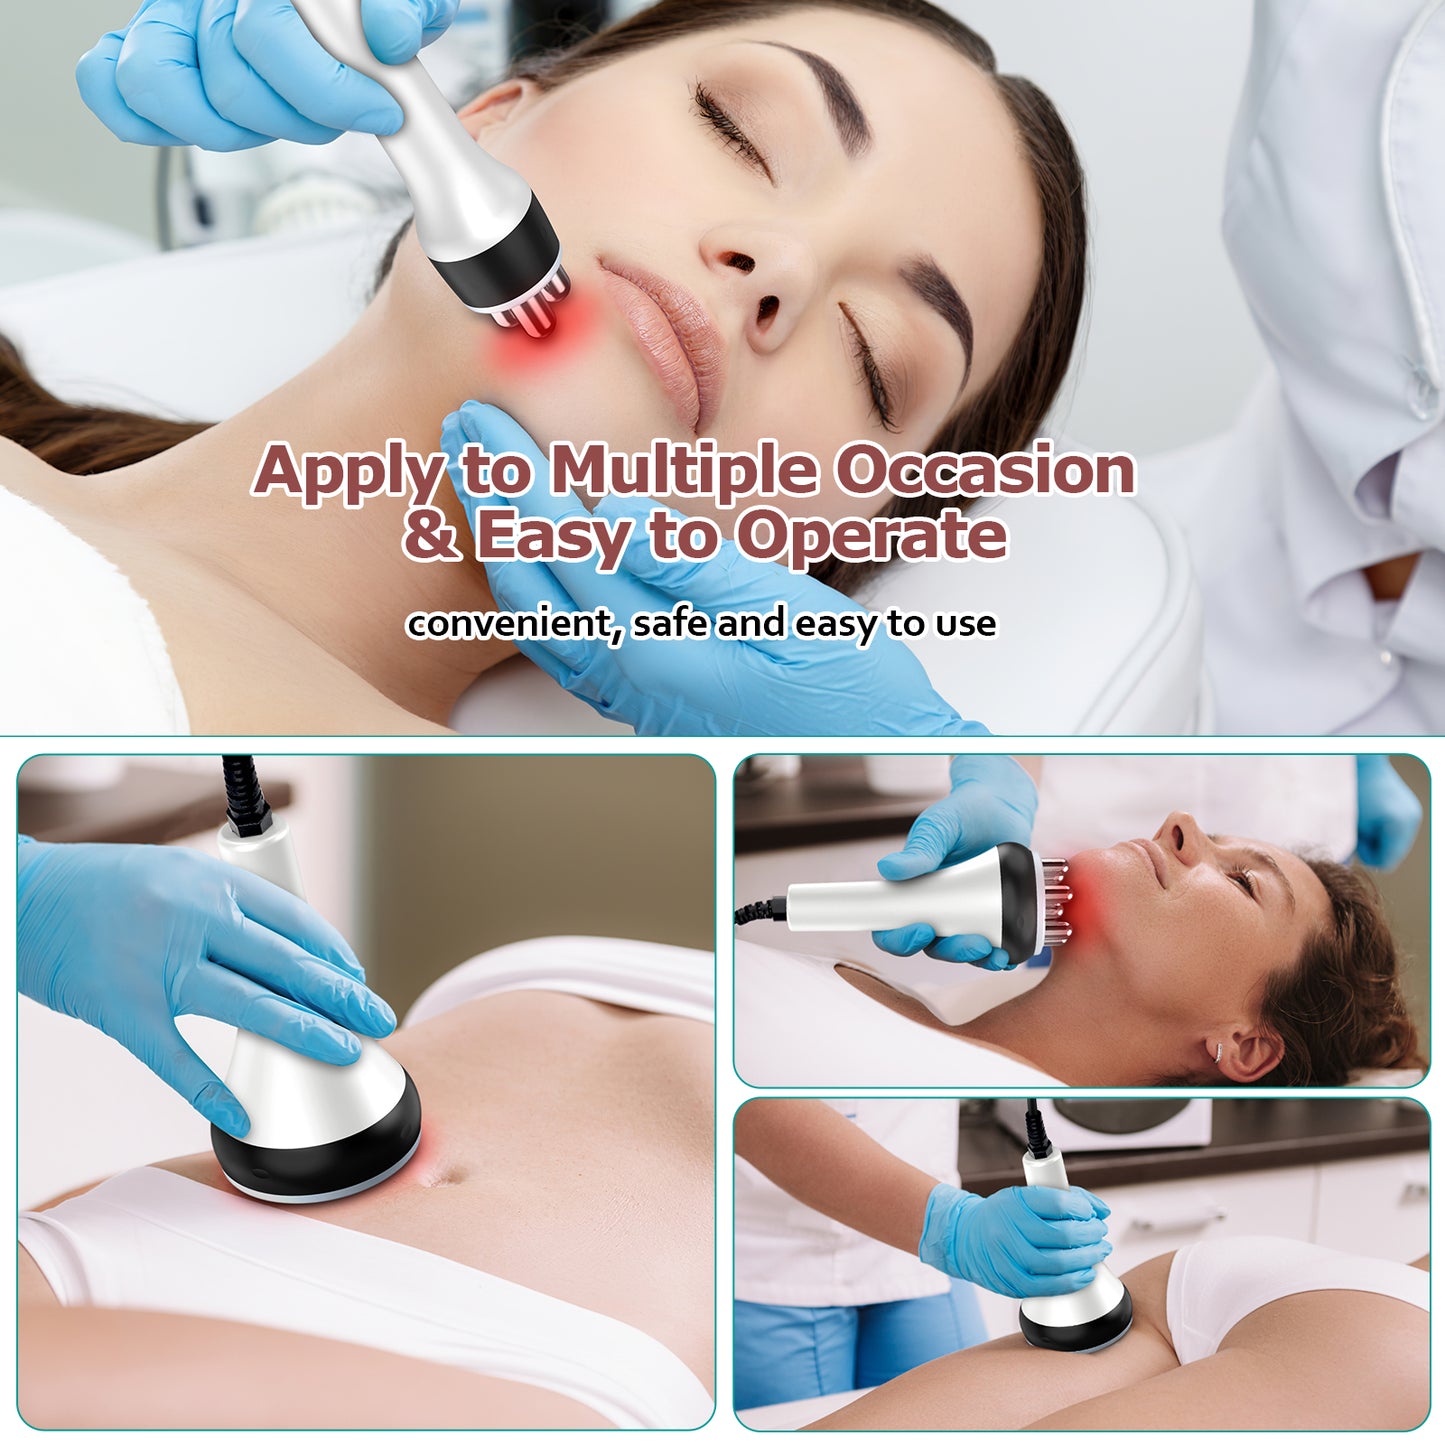 Okyna 3-in-1 Multifunctional Body Facial Care Machine, Body Sculpting Machine for Home Beauty Salon